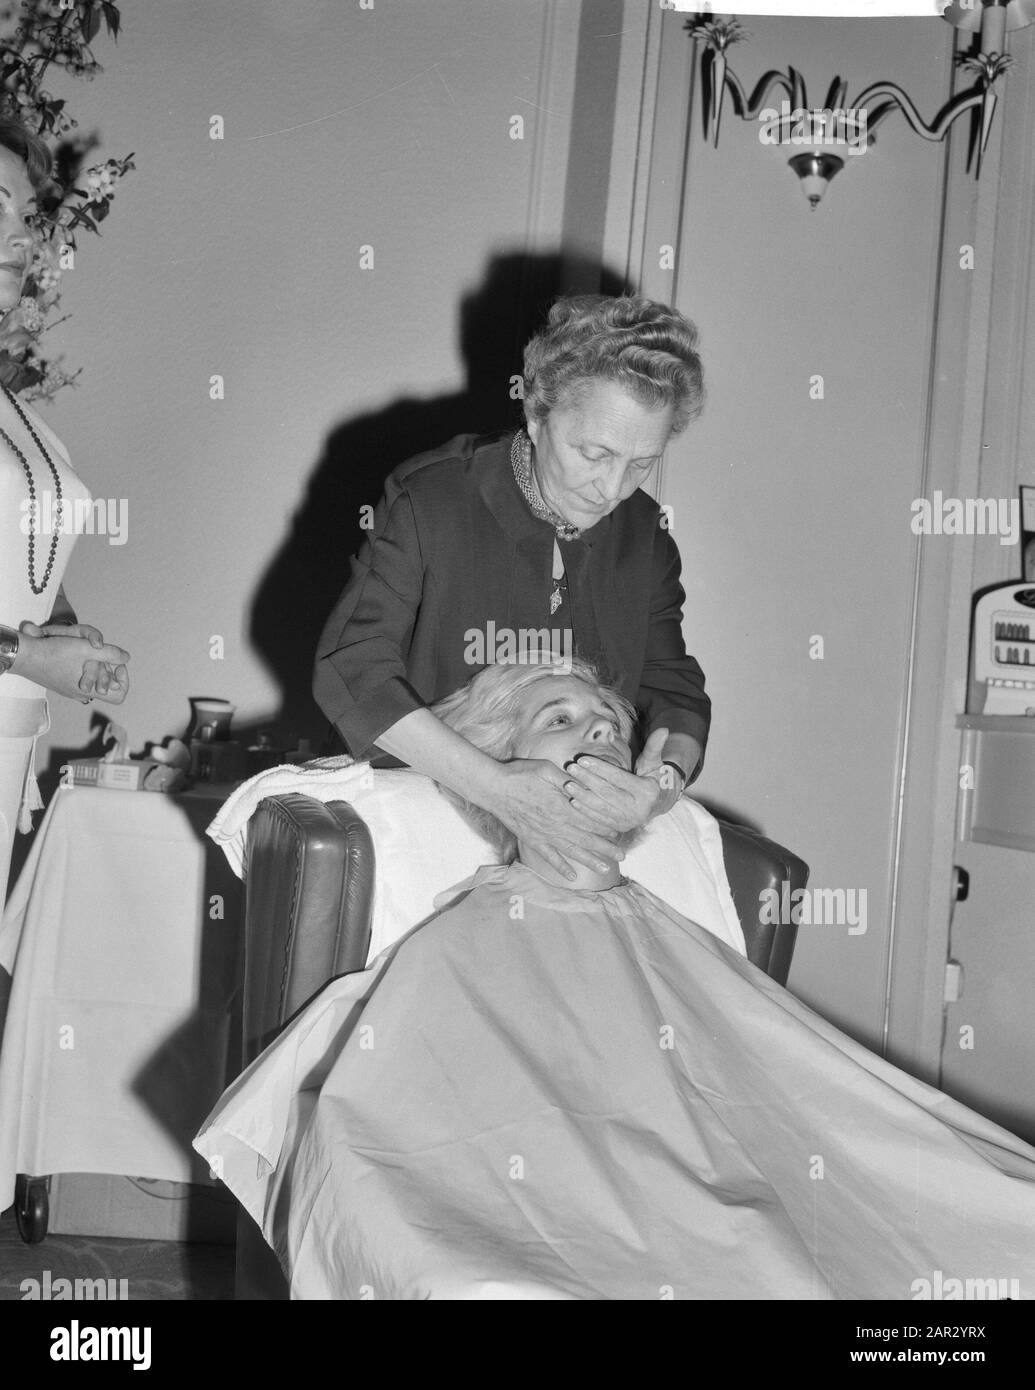 Beautician Nadine G. Payot (75) during a demonstration at the Carlton Hotel  Date: May 14, 1962 Location: France Keywords: demonstrations, beauticians  Personal name: Carlton-Hotel, Payot, Nadine G Stock Photo - Alamy